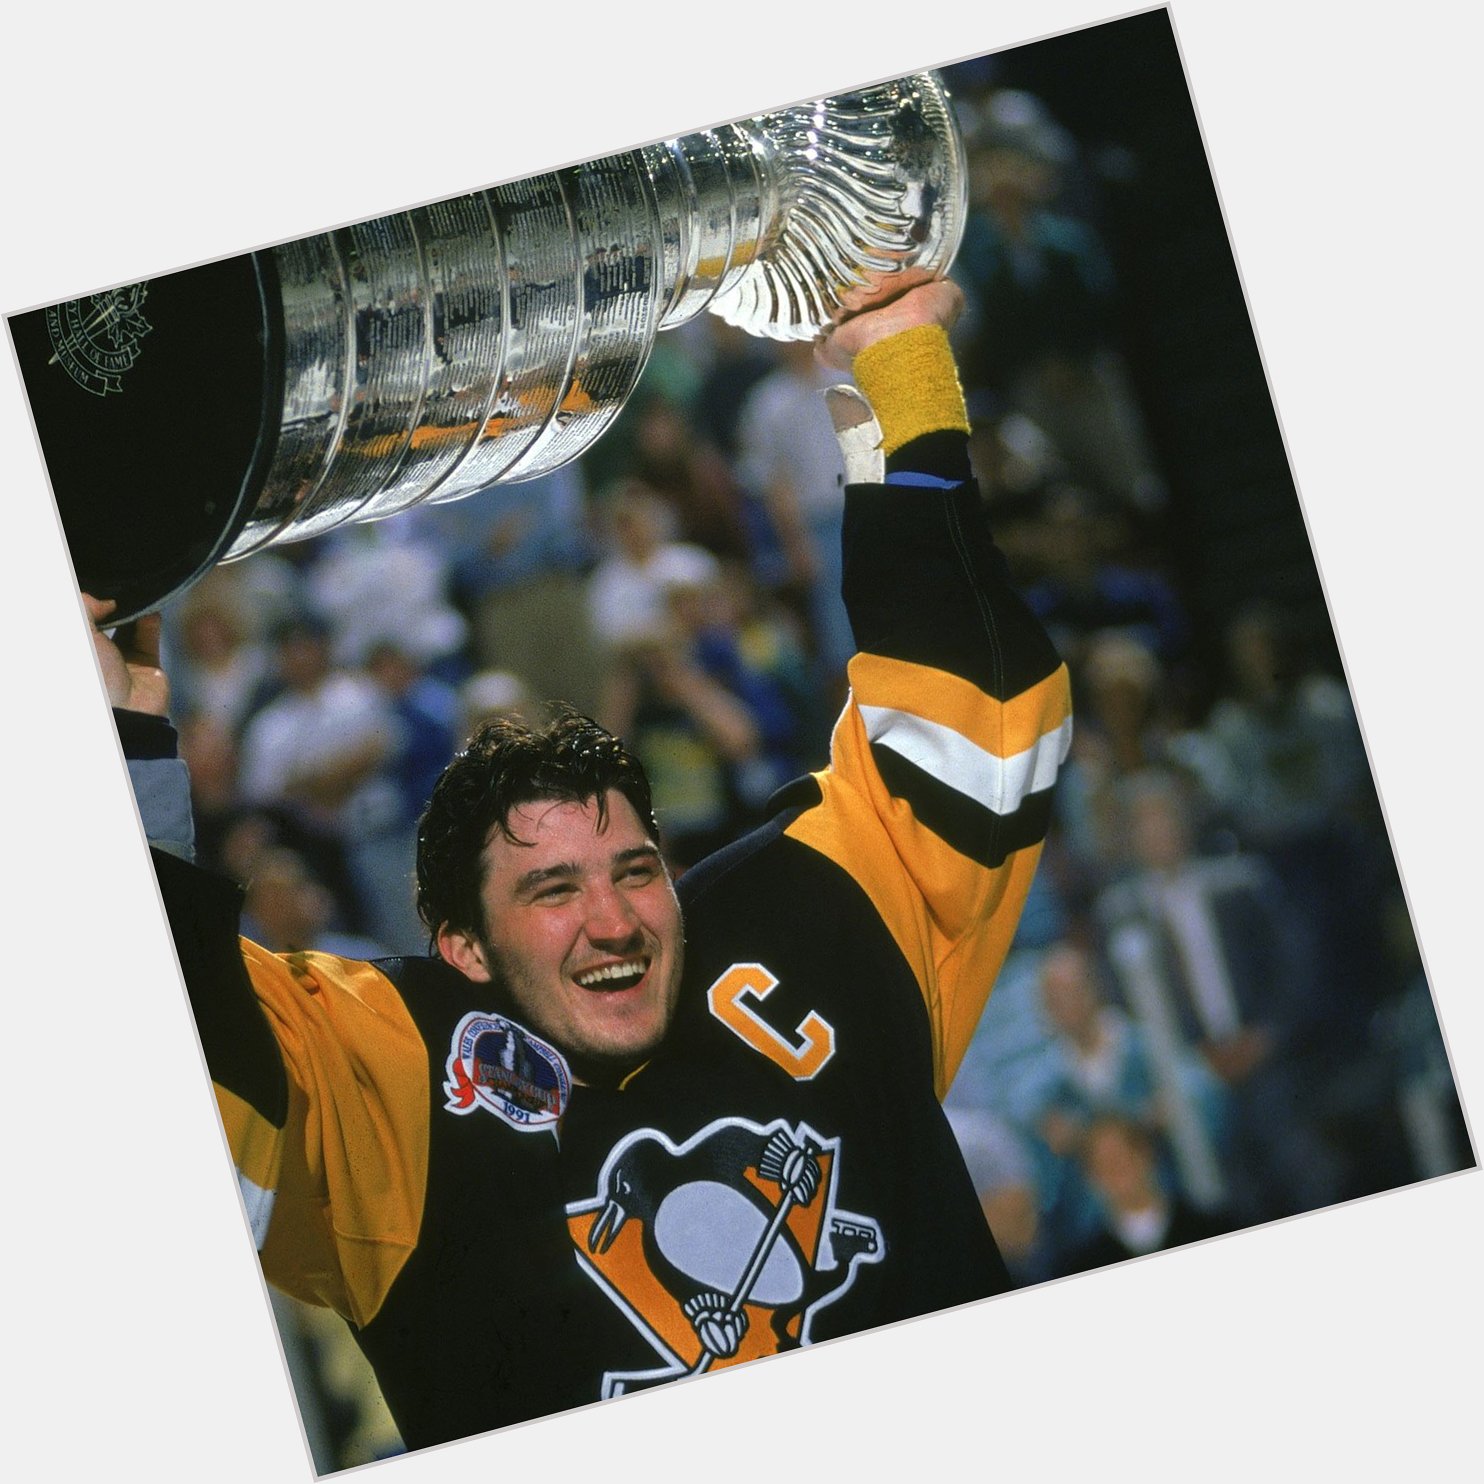 Happy Birthday to one of the greatest hockey players this world has ever seen, Mario Lemieux!  